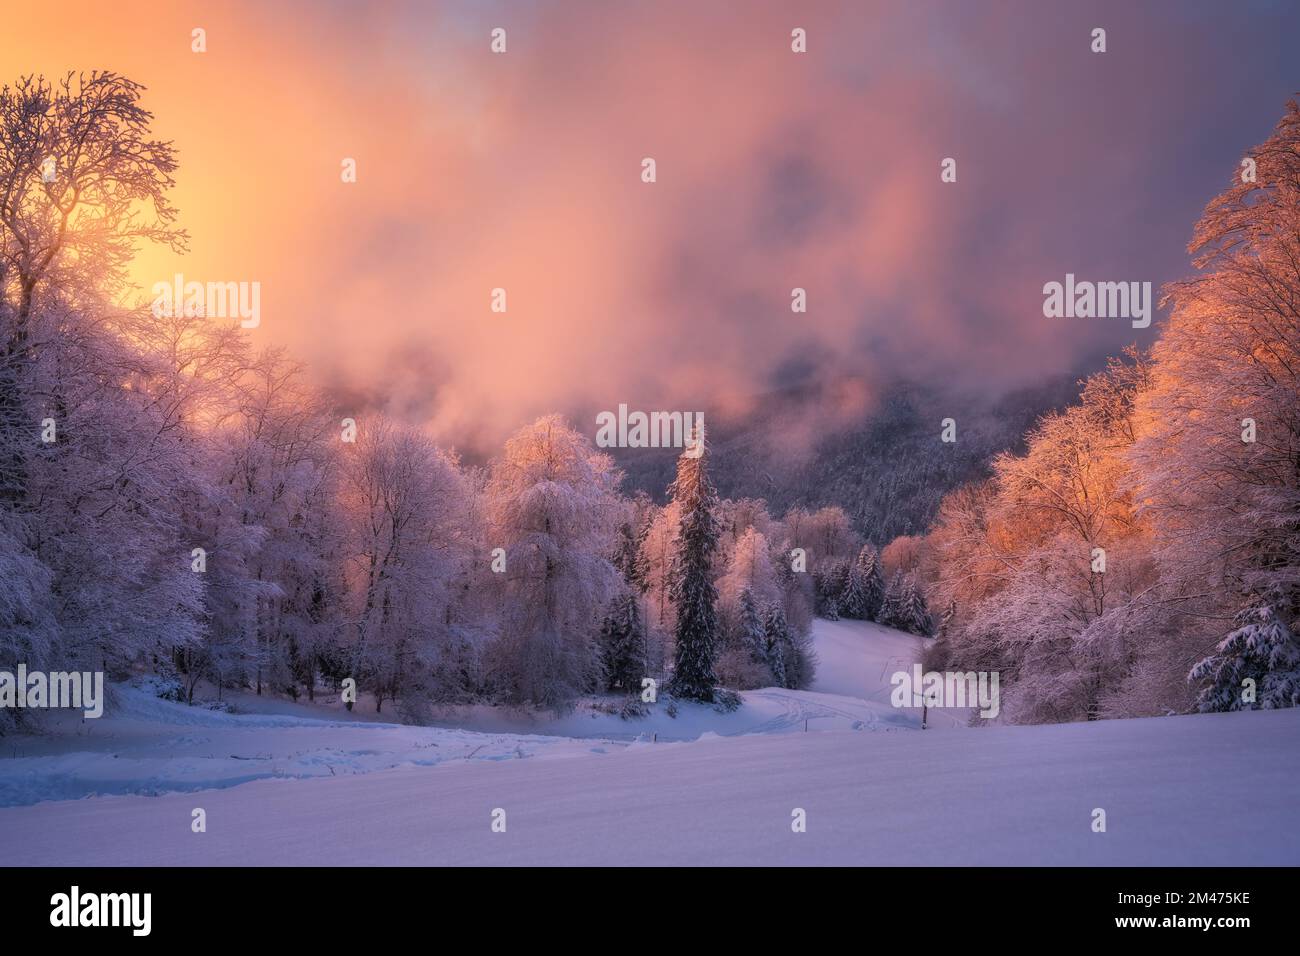 Snowy forest in hoar and pink low clouds in beautiful winter Stock Photo